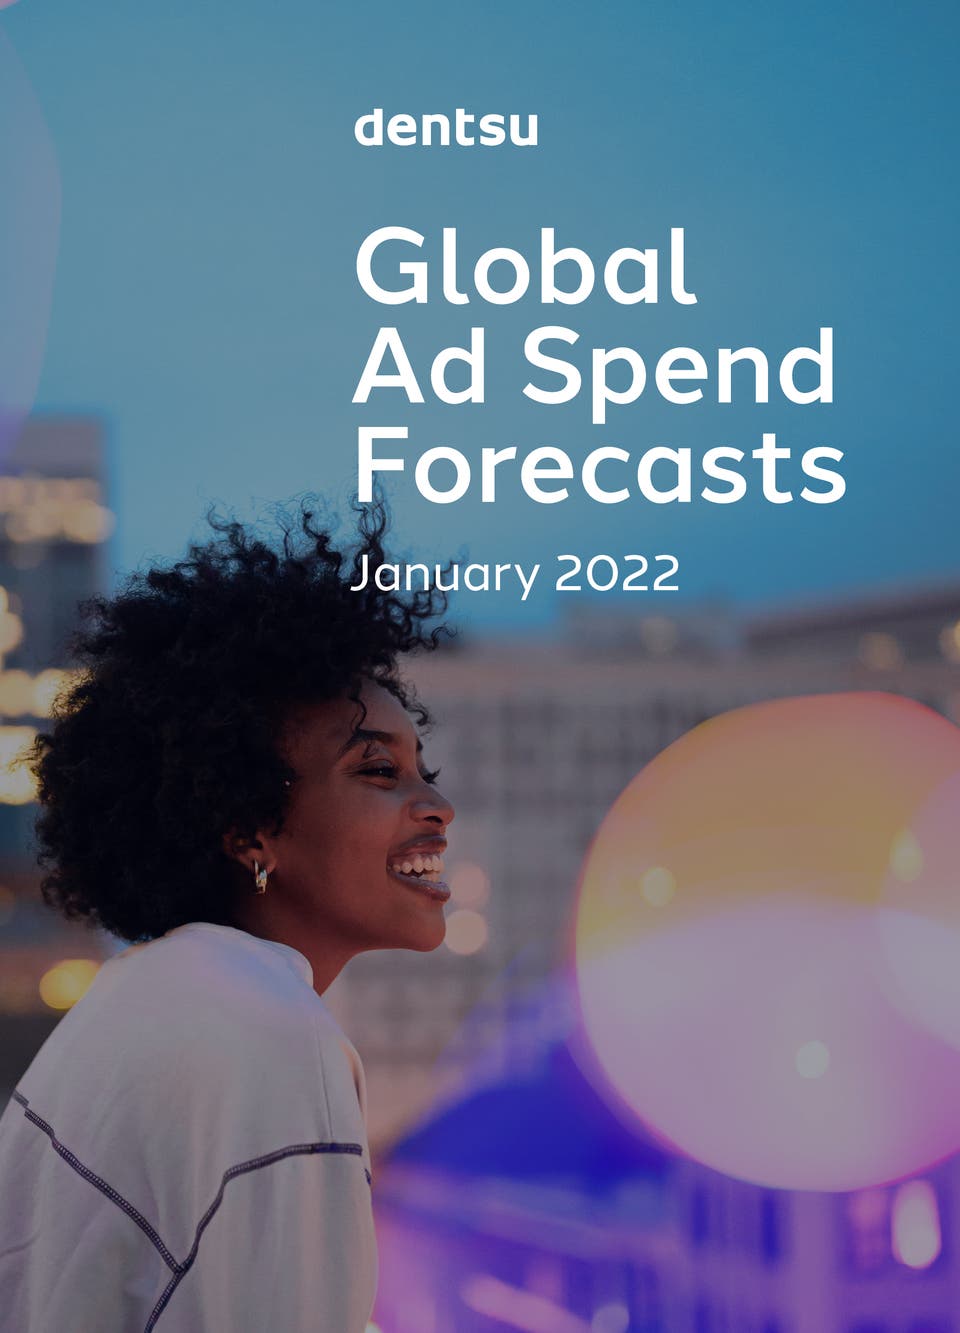 Global Ad Spend Forecasts January 2022